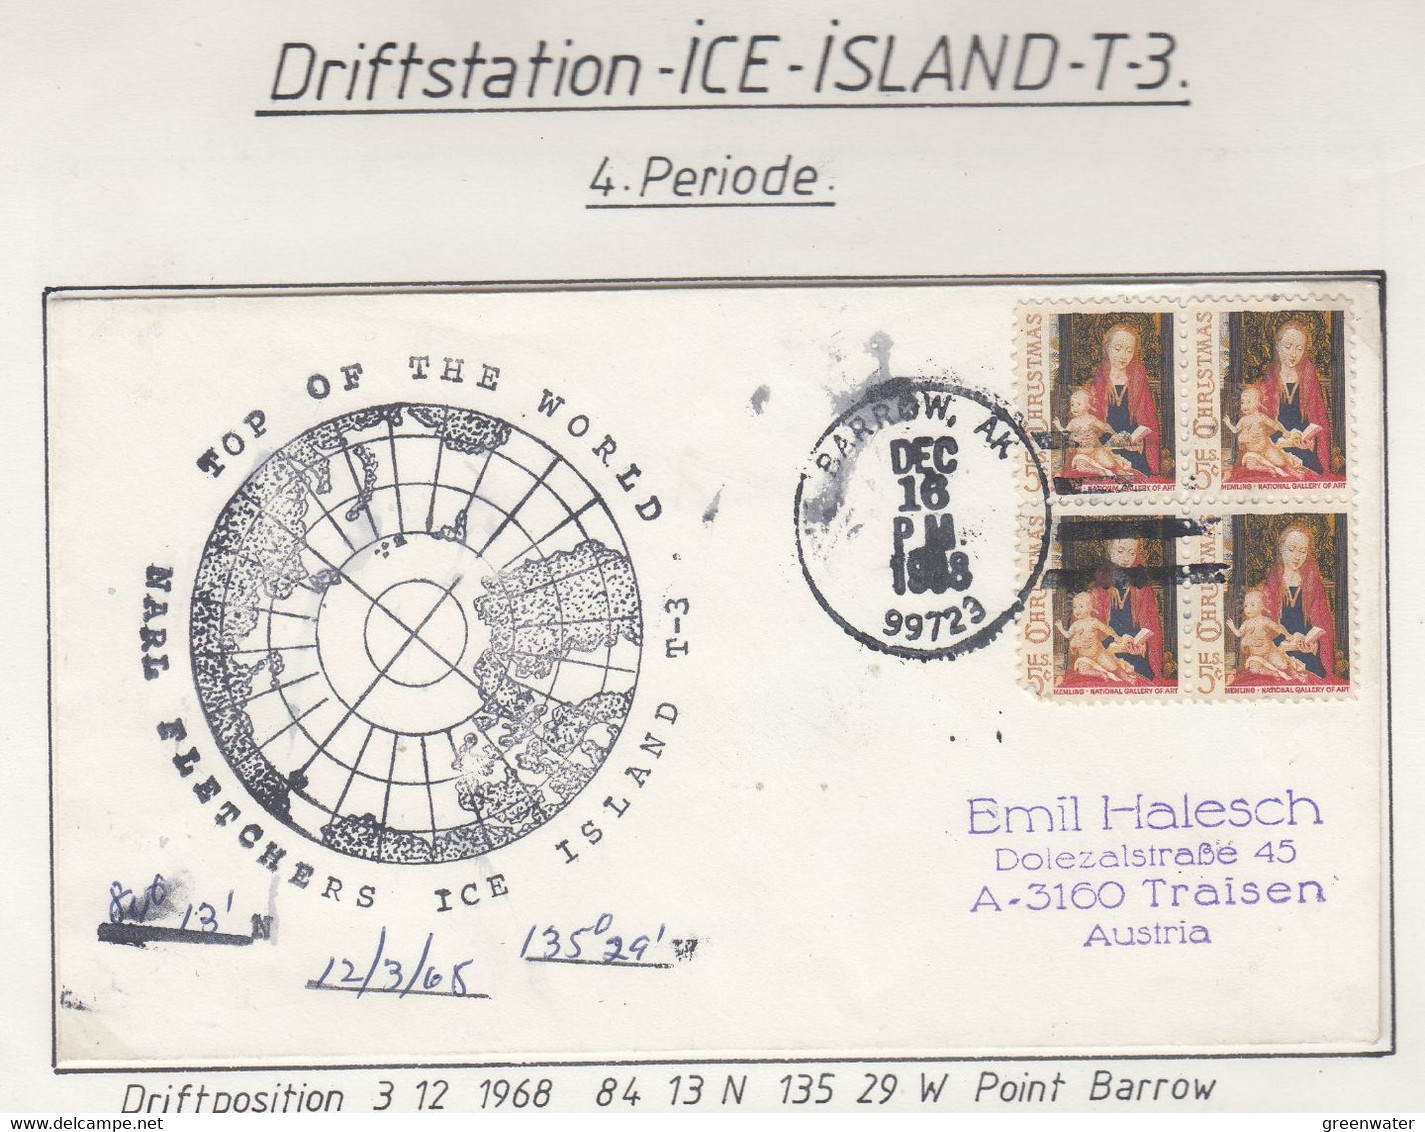 USA Driftstation ICE-ISLAND T-3 Cover Ca Fletcher's Ice Island T-3 Periode 4 Ca  DEC 16 1968 (DR128) - Scientific Stations & Arctic Drifting Stations